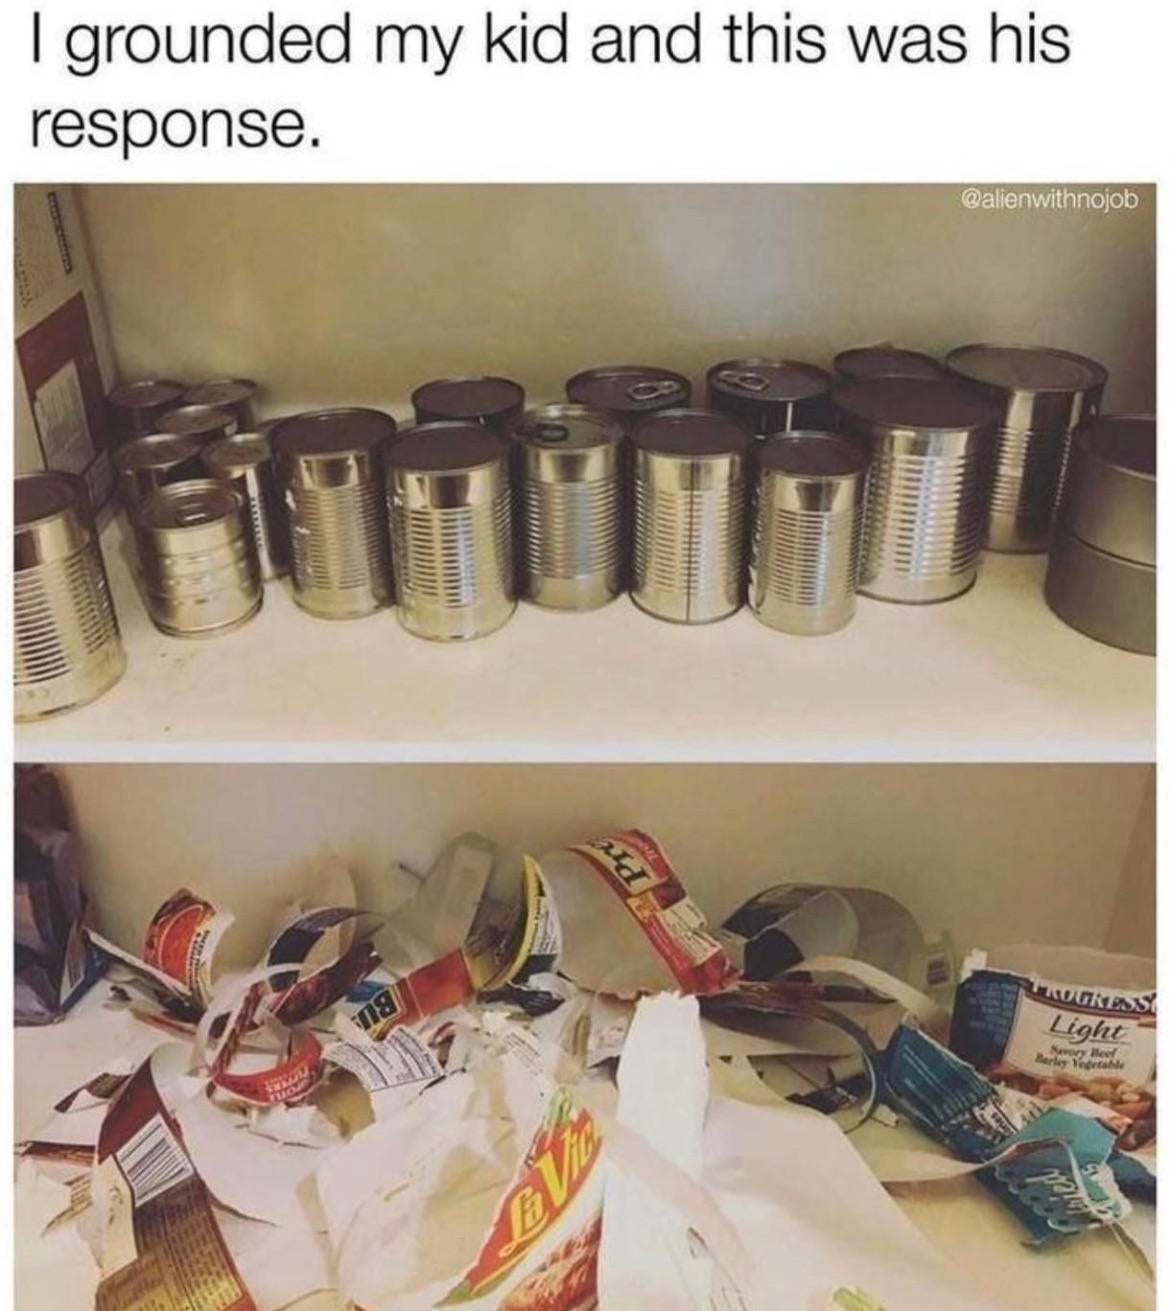 Shelf with overturned cans and scattered wrappers, joke on child&#x27;s humorous reaction to being grounded